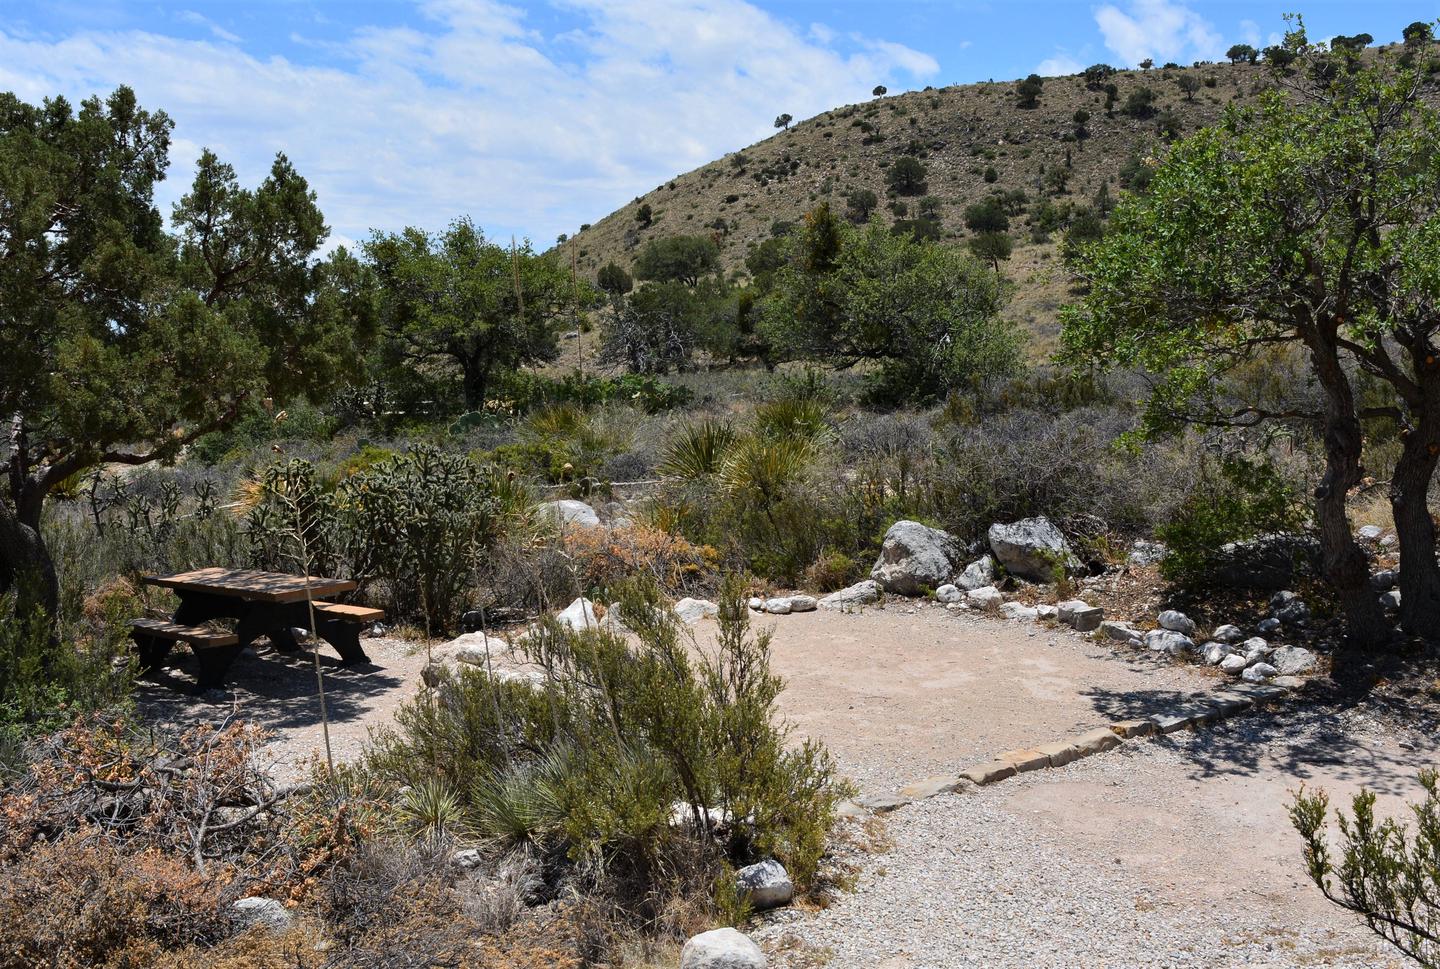 Tent campsite number six shown with desert vegetation and view of hillside in the background.Tent campsite number six shown with desert vegetation and view of hillside to the SW of site.